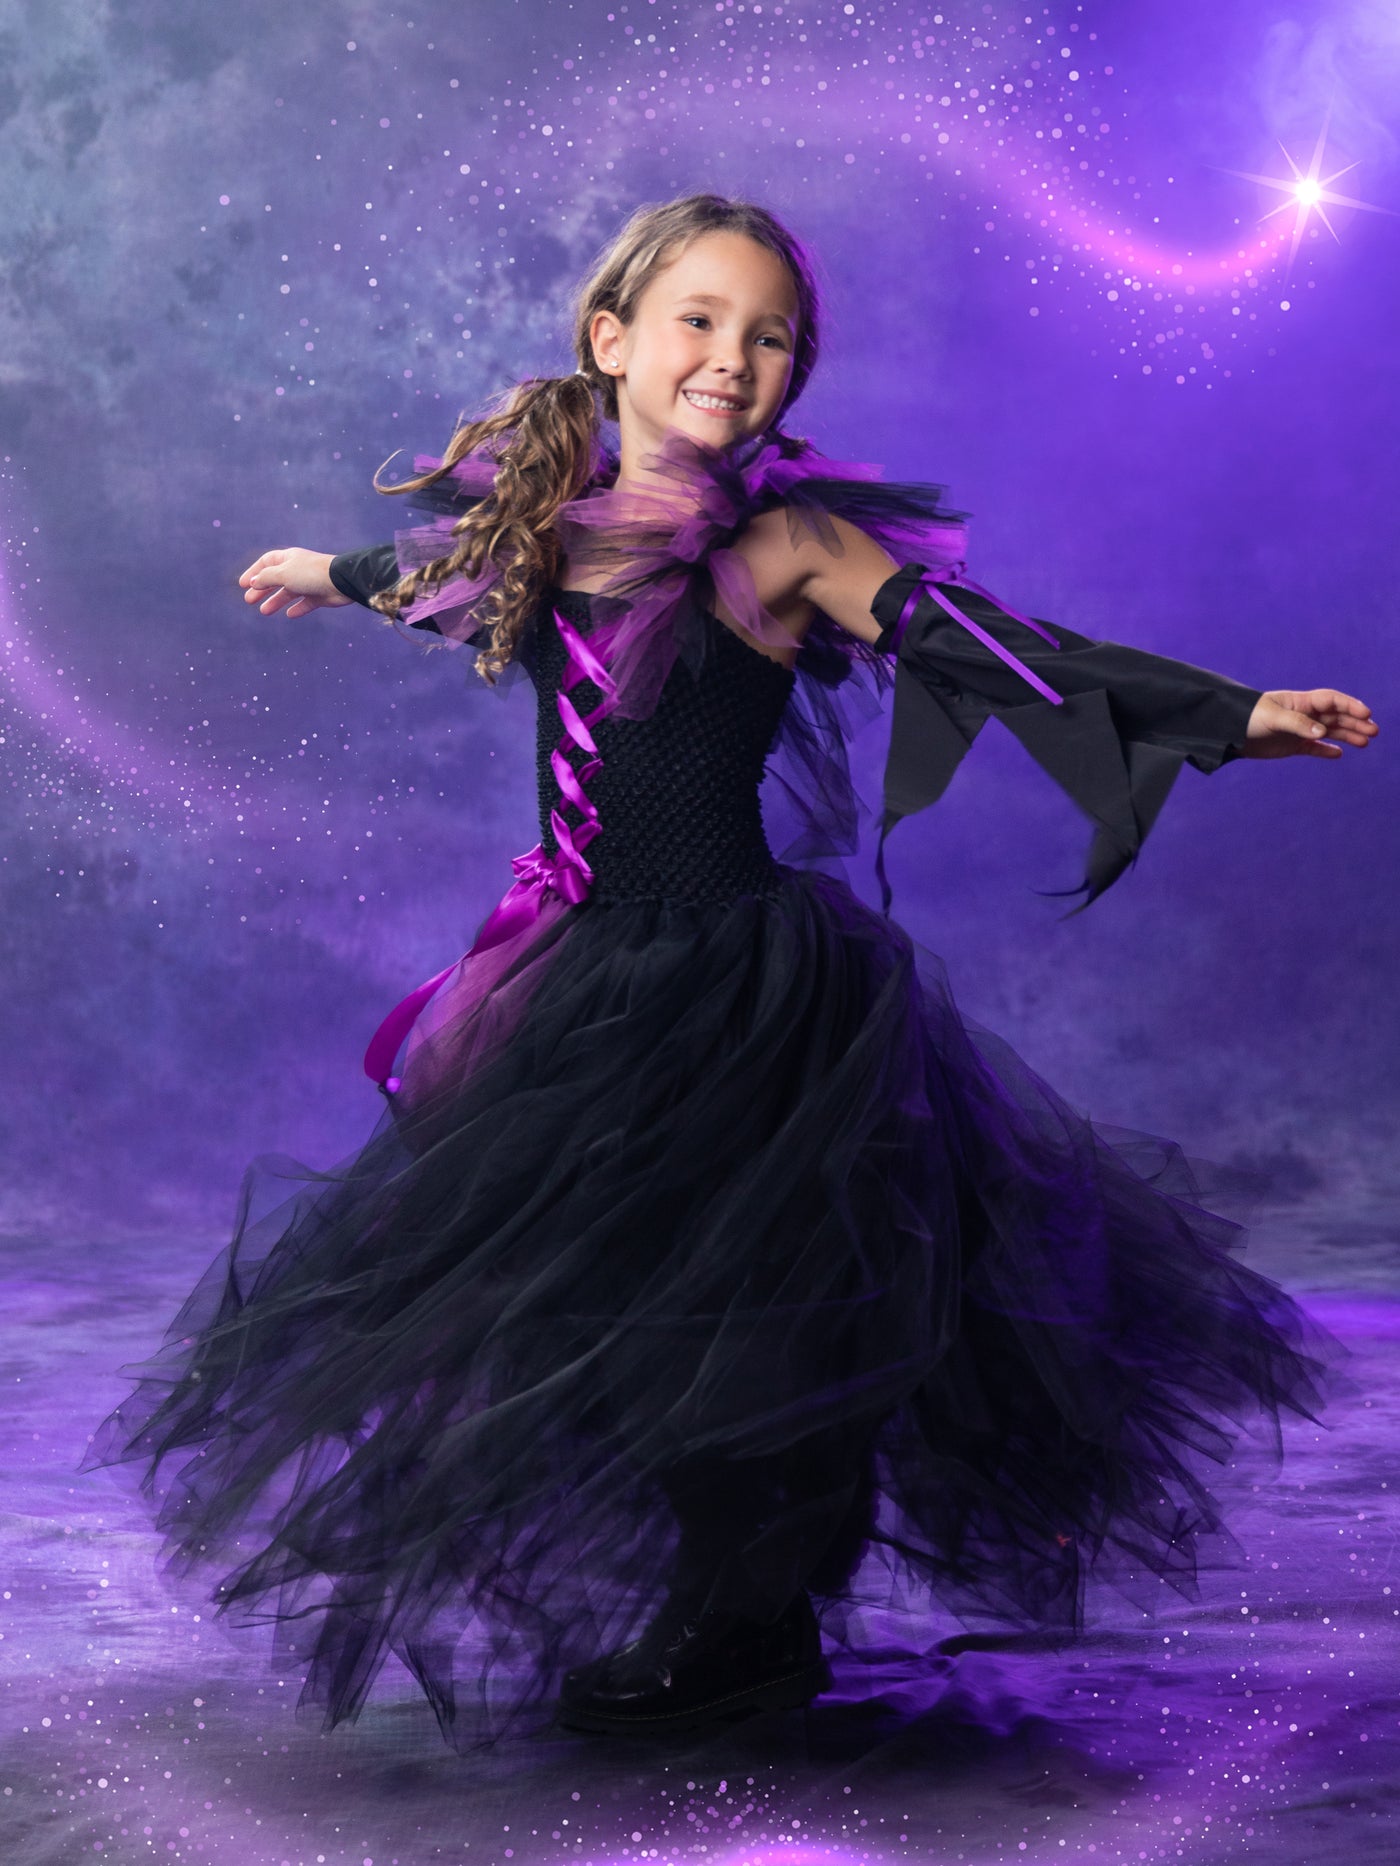 NWT Girls Large 10-12 Black Purple Witch Halloween Dance Party Dress  Costume L